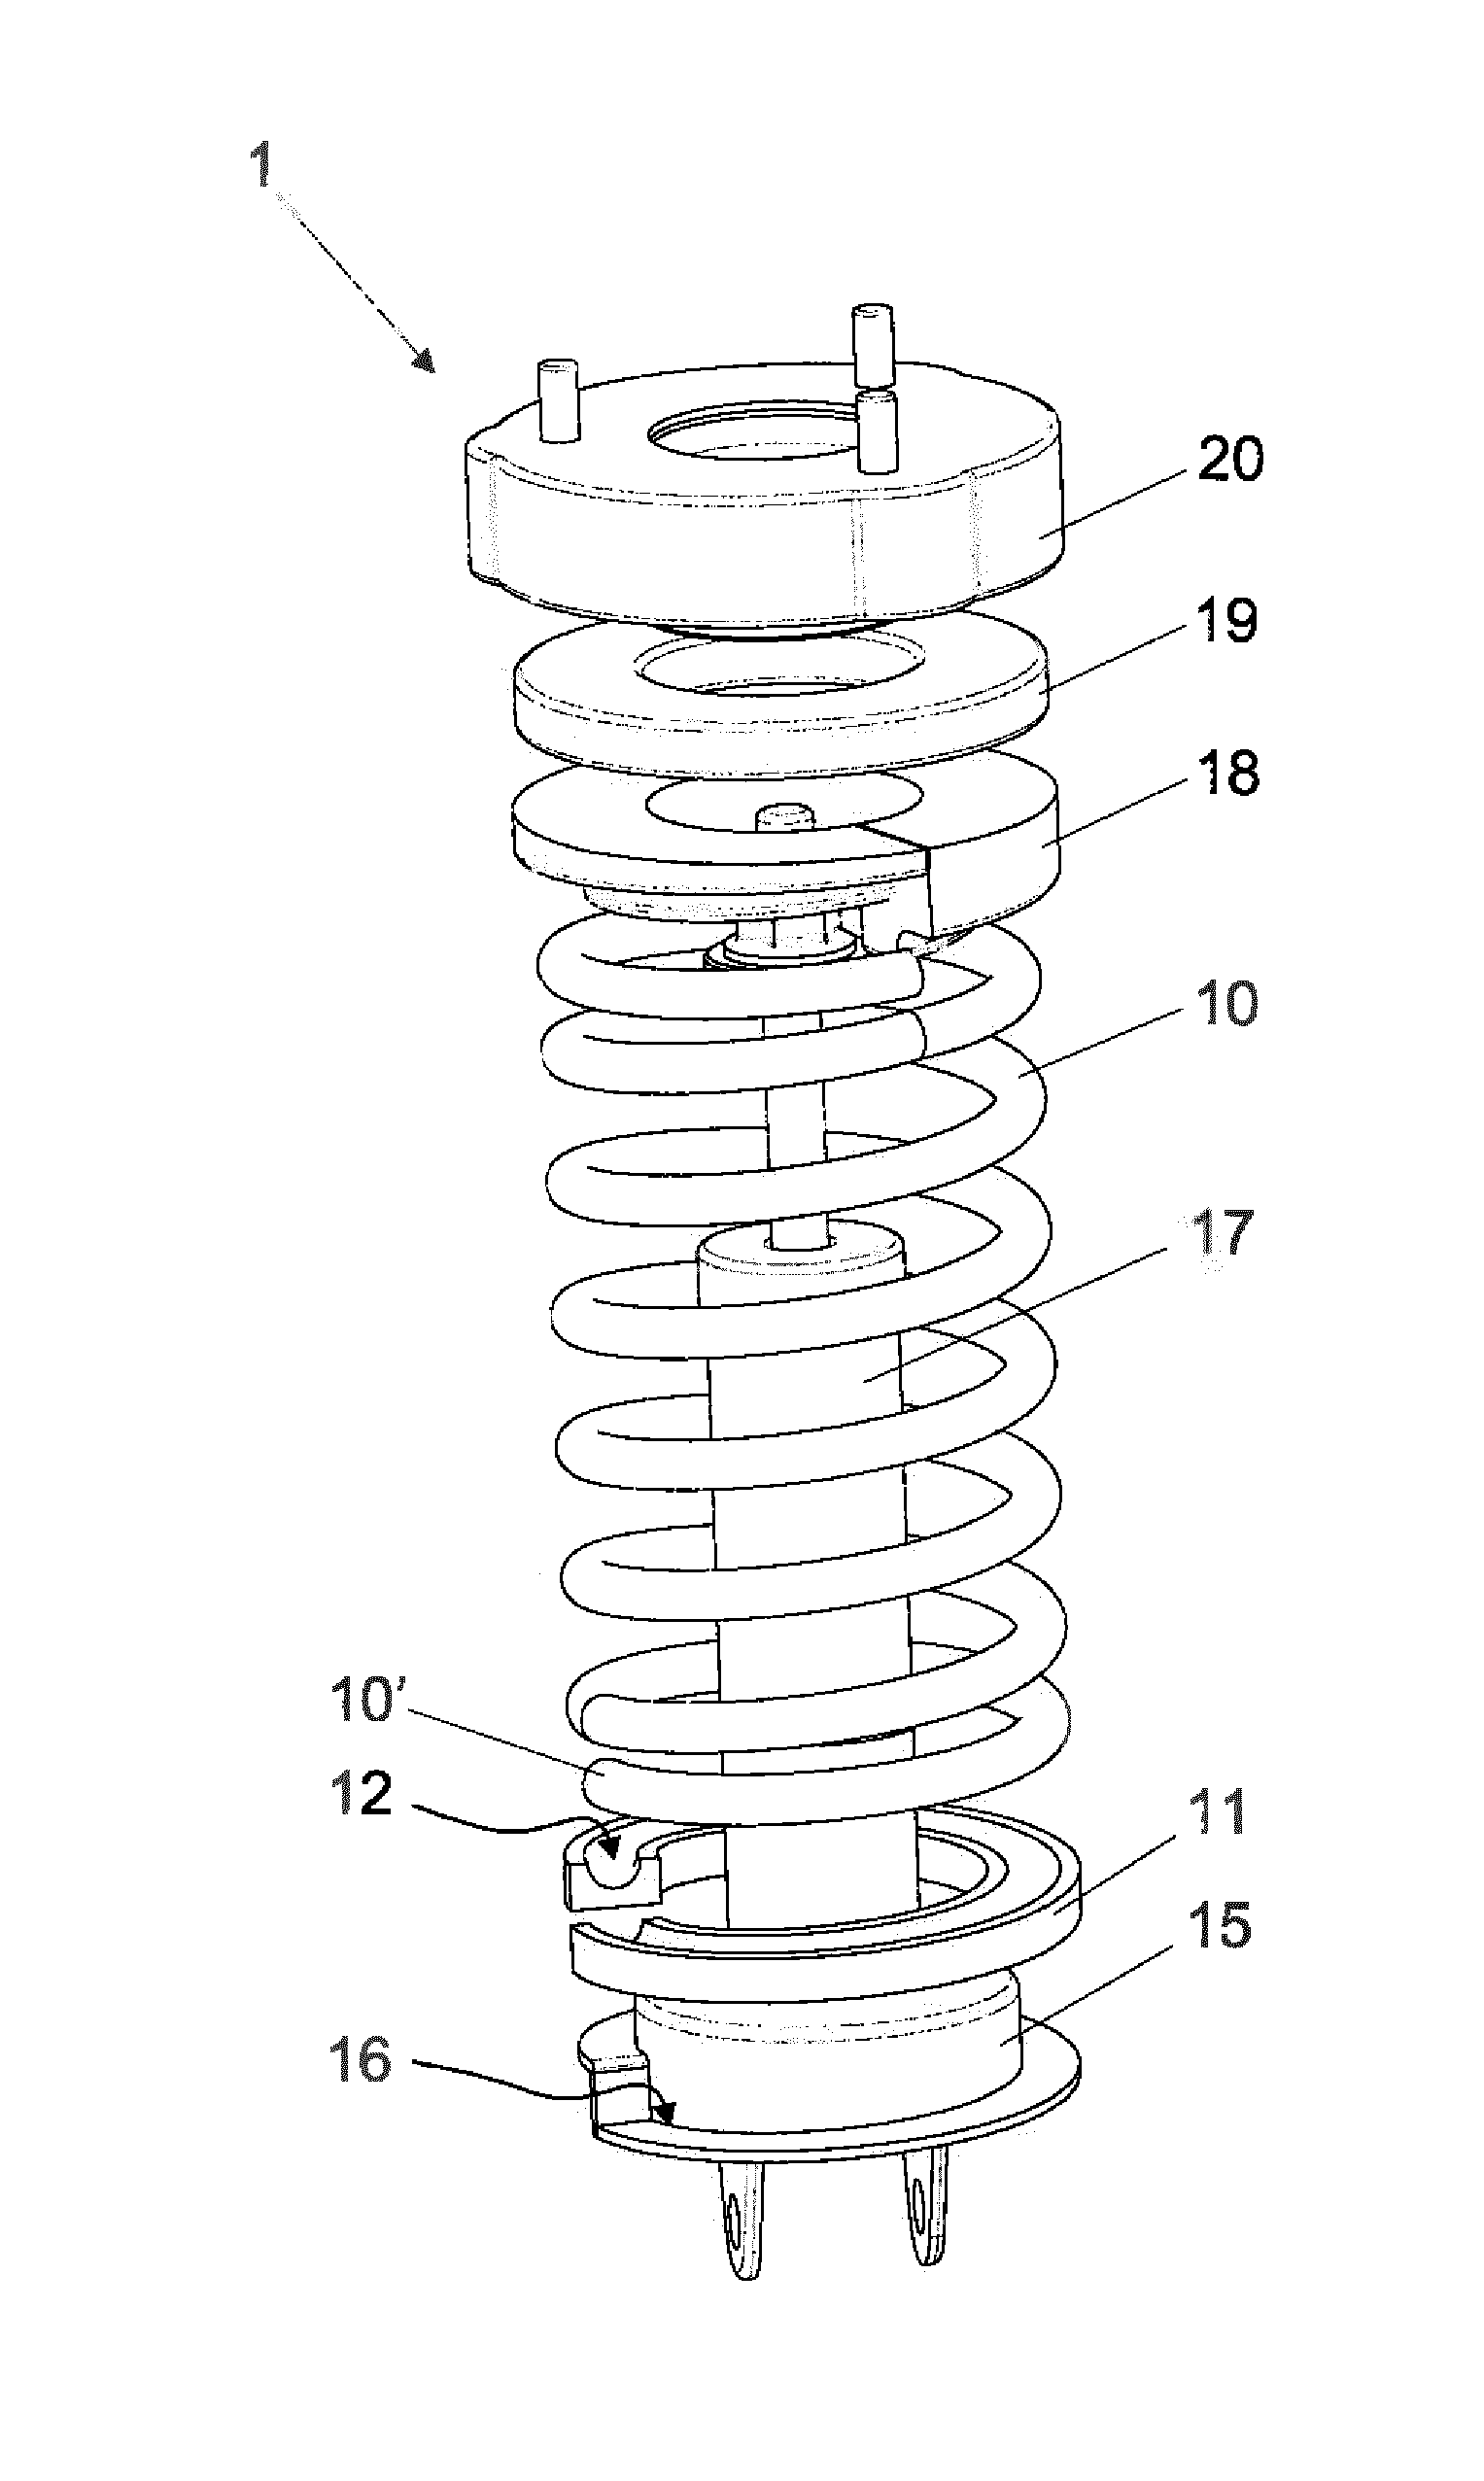 Bearing arrangement for a spring of a vehicle chassis